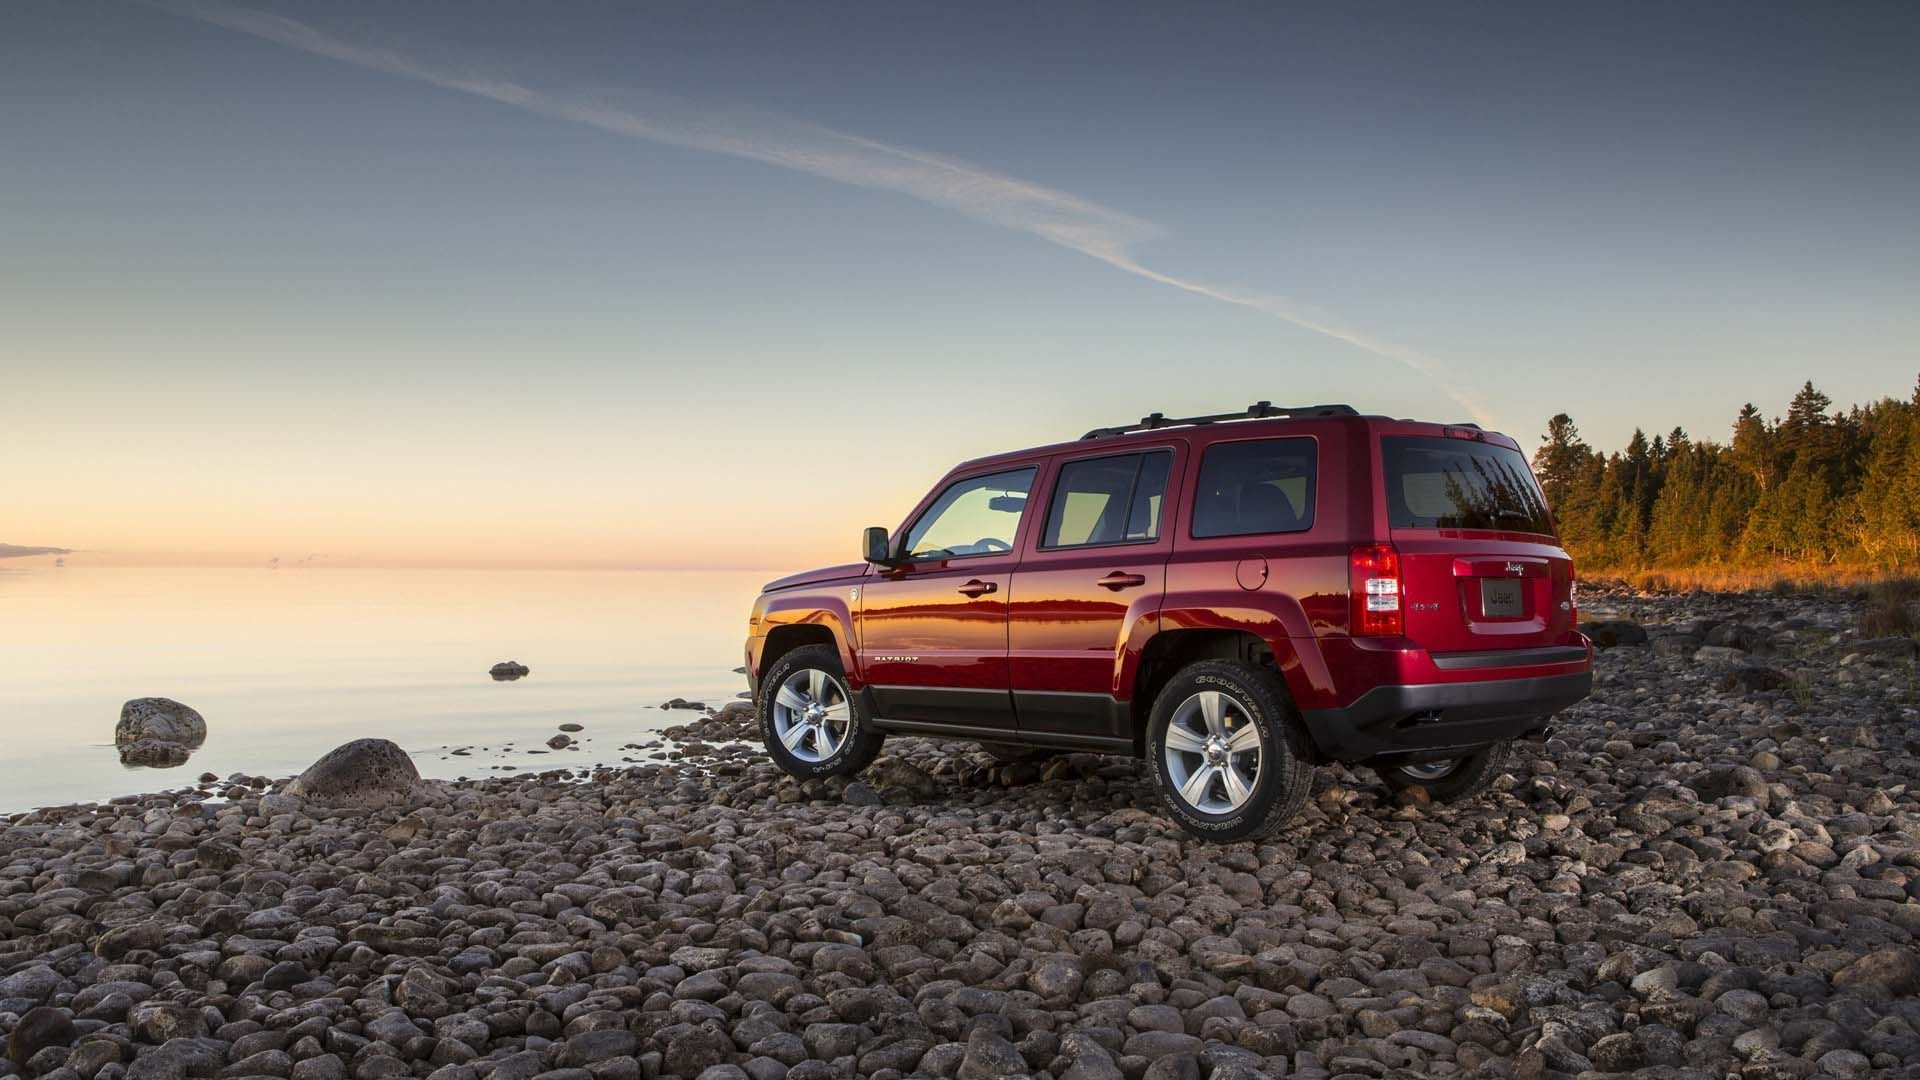 1920x1080 9/jeep-patriot-mk74-the-red-adventure-car.jpg 1080x/wp-content/uploads/HTML/ Jeep-iPhone-Wallpapers-76.html